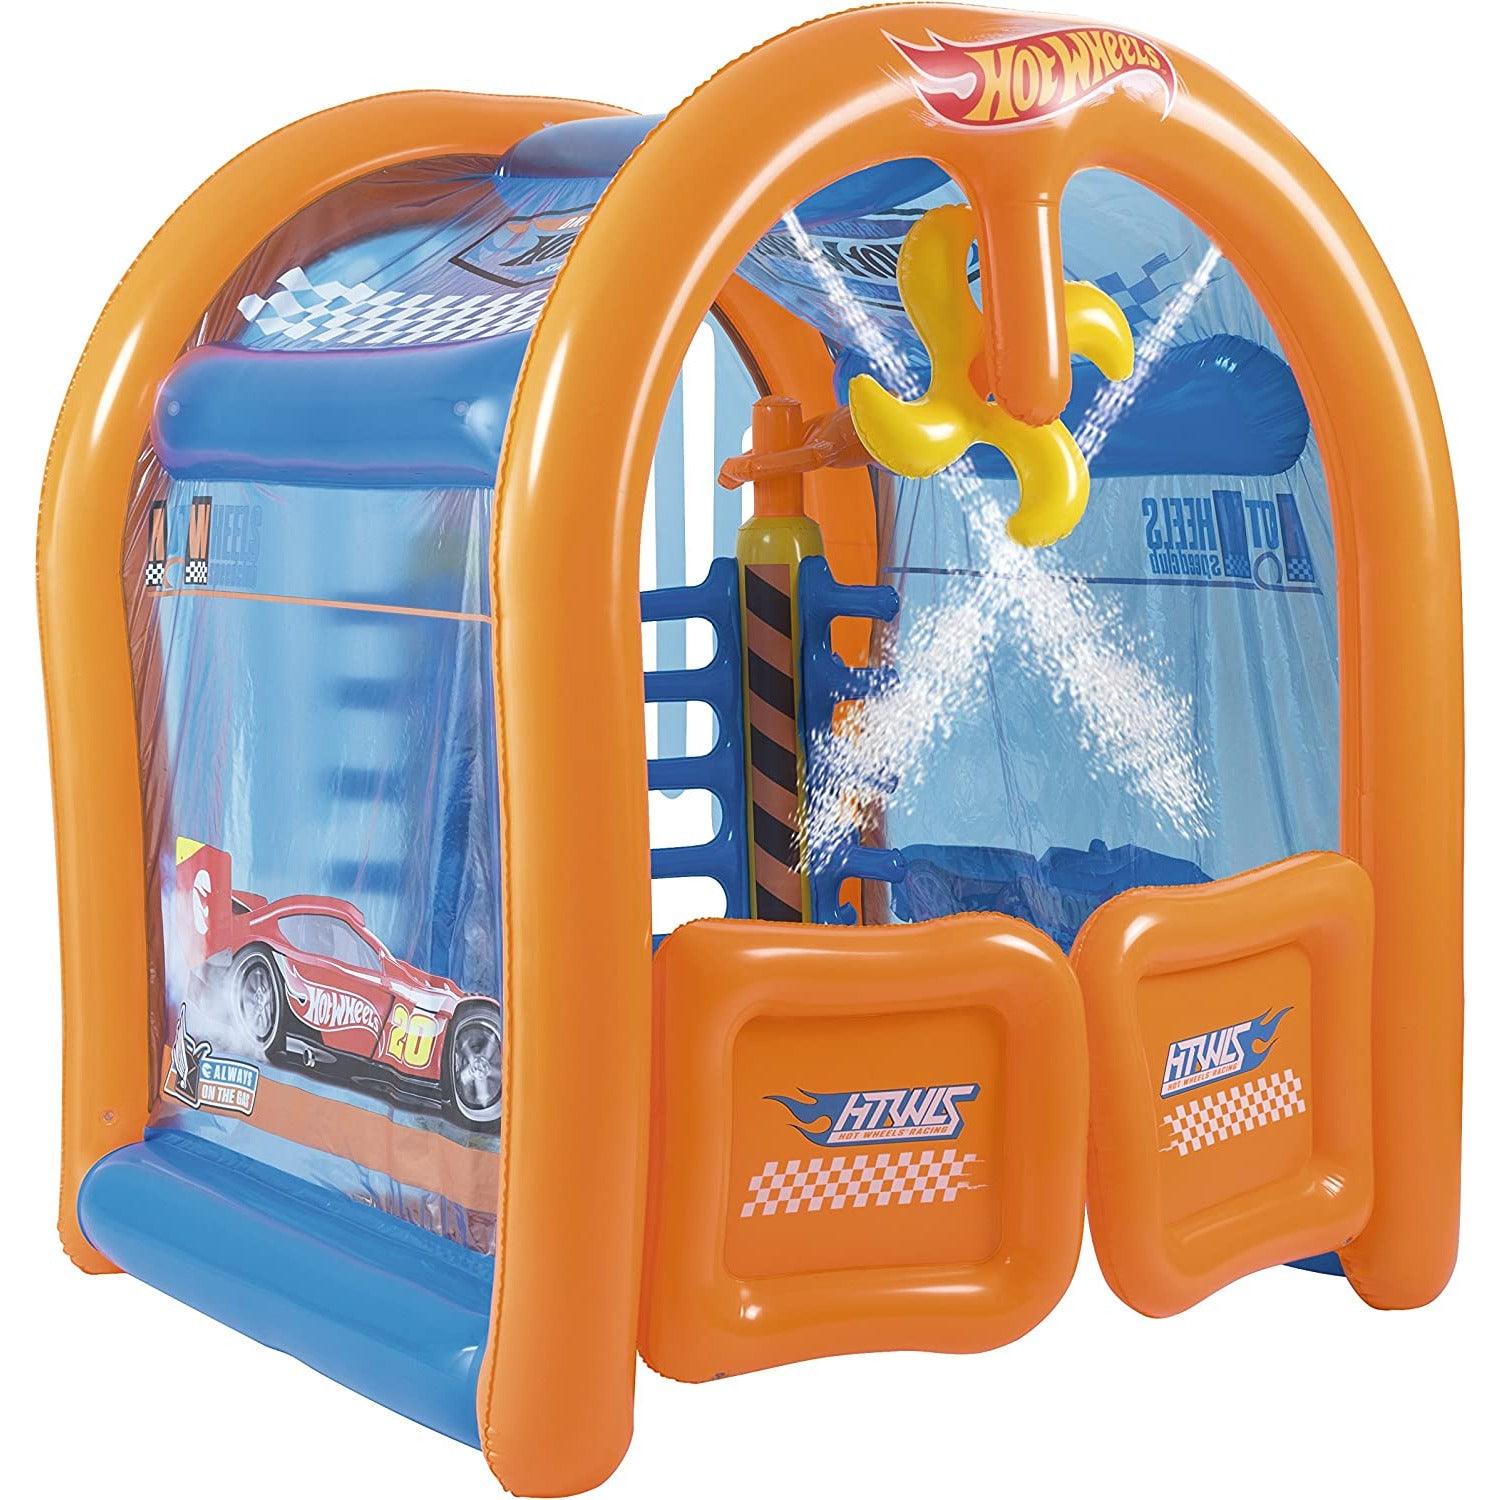 Bestway 93406 Car Wash Center Hot Wheels 1.53m x 1.31m x 1.50m - BumbleToys - 8-13 Years, Boys, Eagle Plus, Floaters, Girls, Sand Toys Pools & Inflatables, unicorn